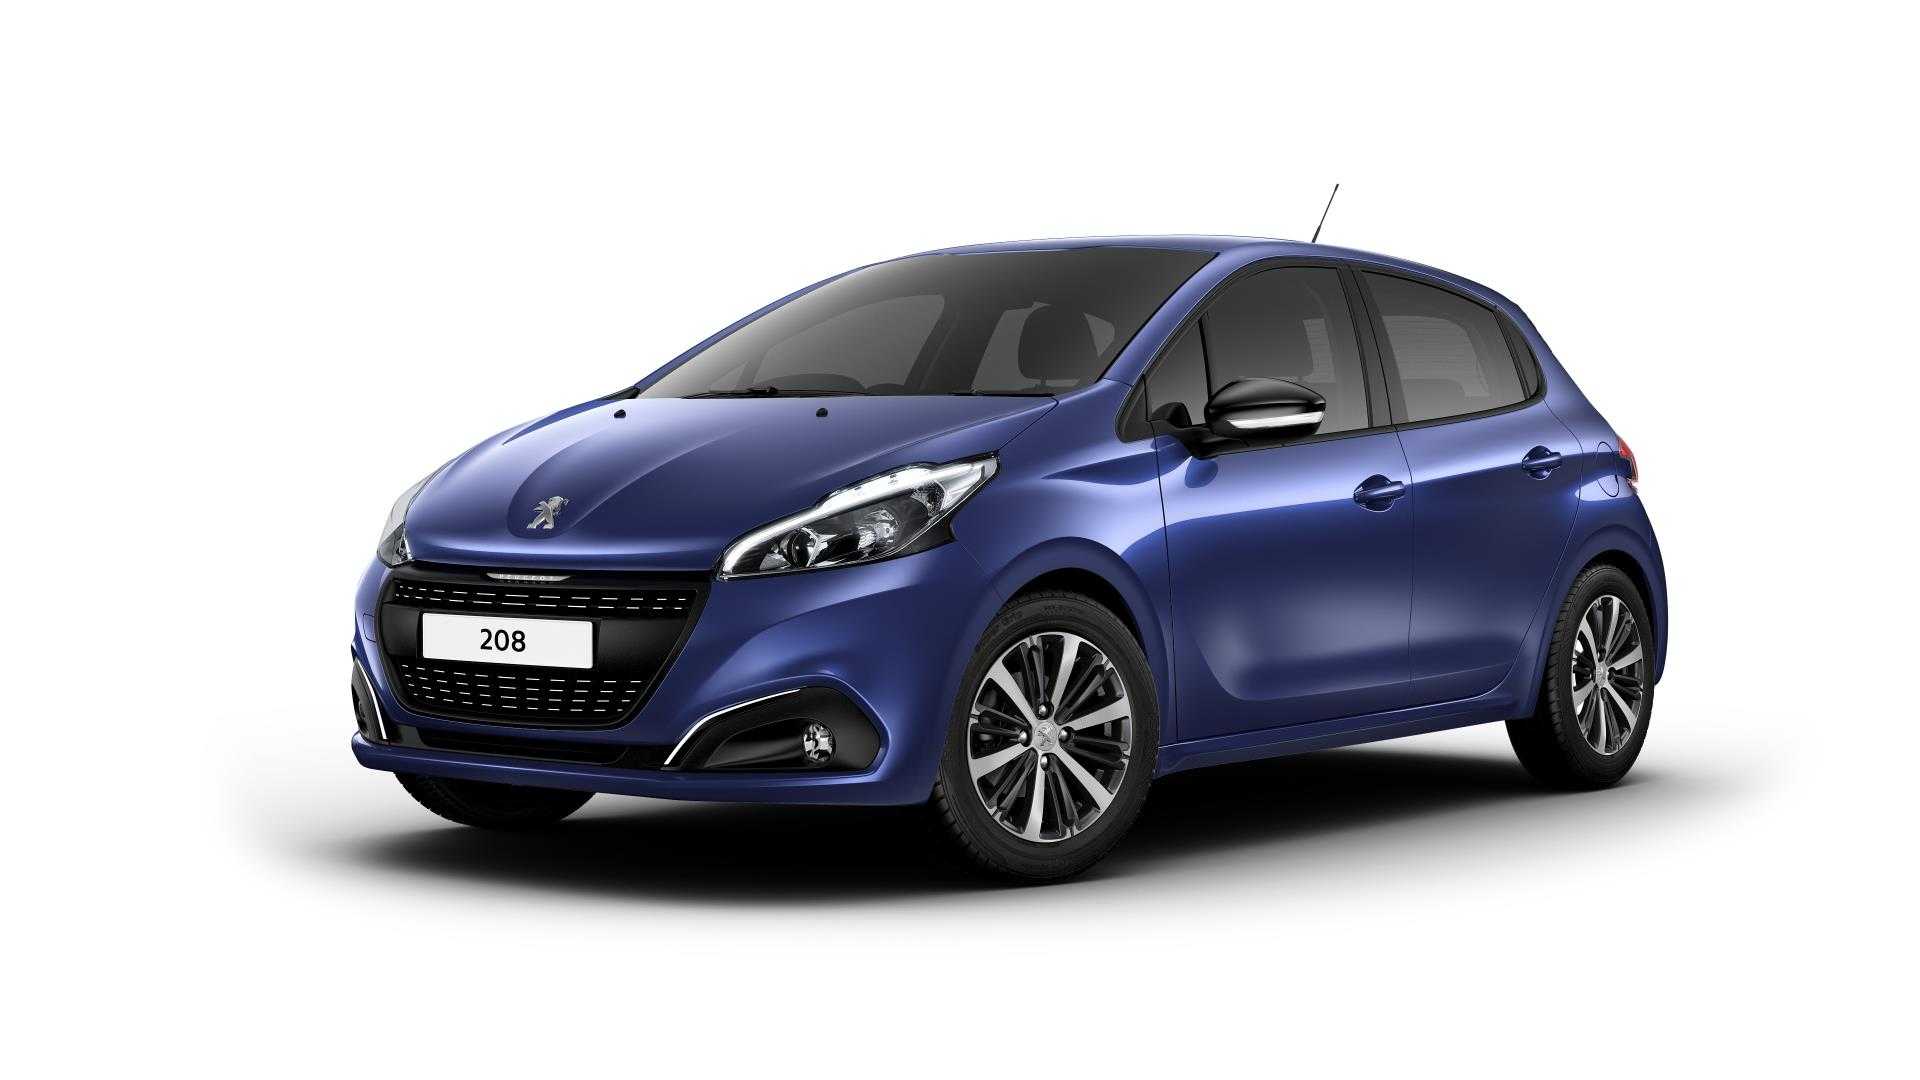 Electric Peugeot Will Appear Mostly Unchanged From ICE